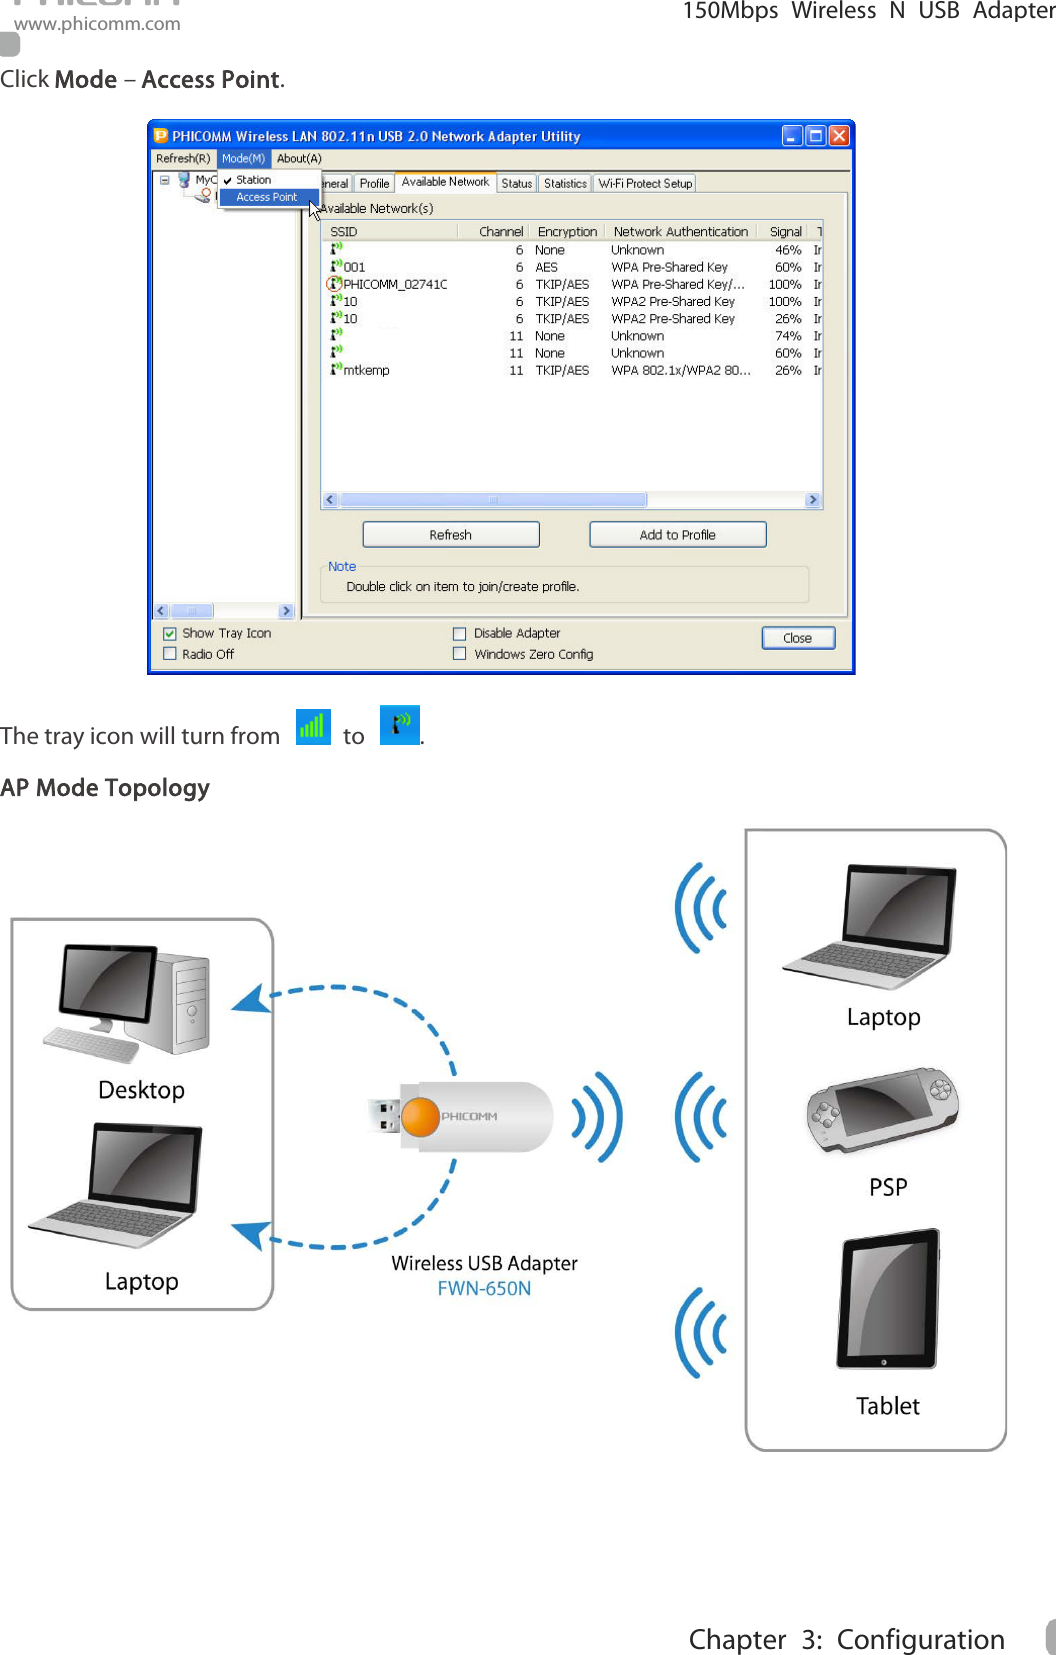                                                            150Mbps Wireless N USB Adapter www.phicomm.com 11 Chapter  3: Configuration  Click Mode – Access Point.  The tray icon will turn from    to  . AP Mode Topology      